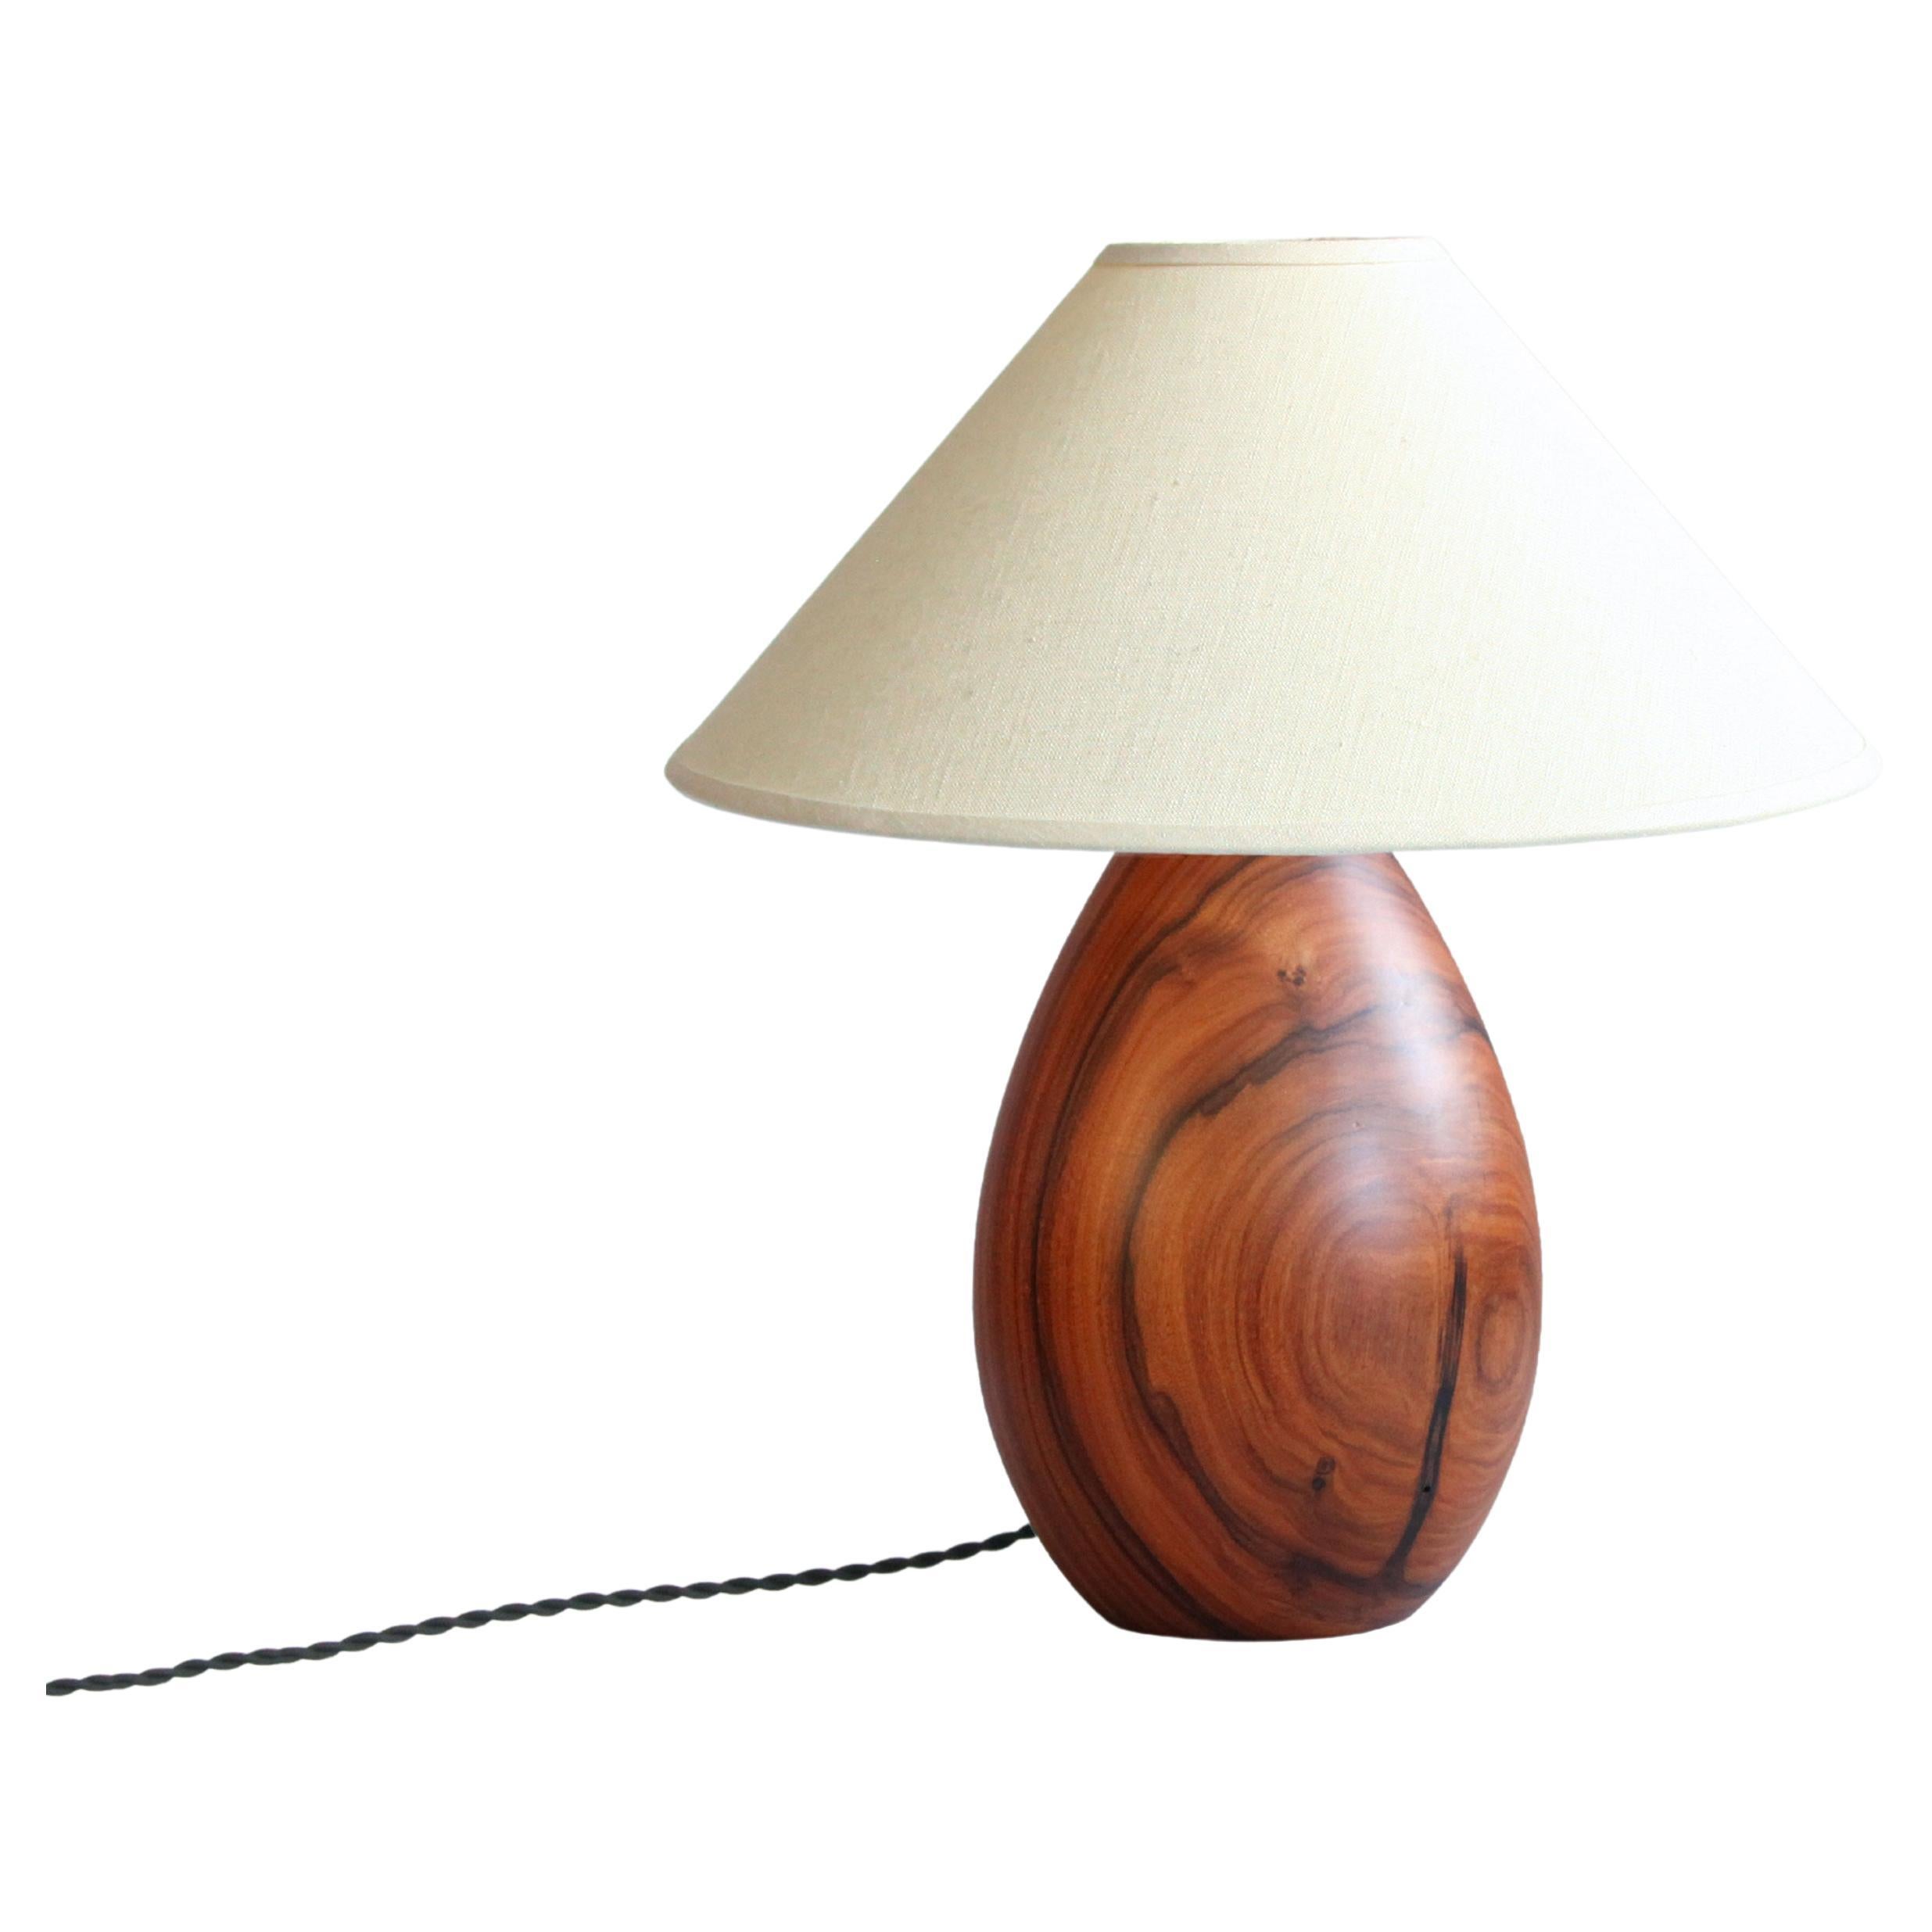 Tropical Hardwood Lamp and White Linen Shade, Small Medium, Árbol Collection, 29